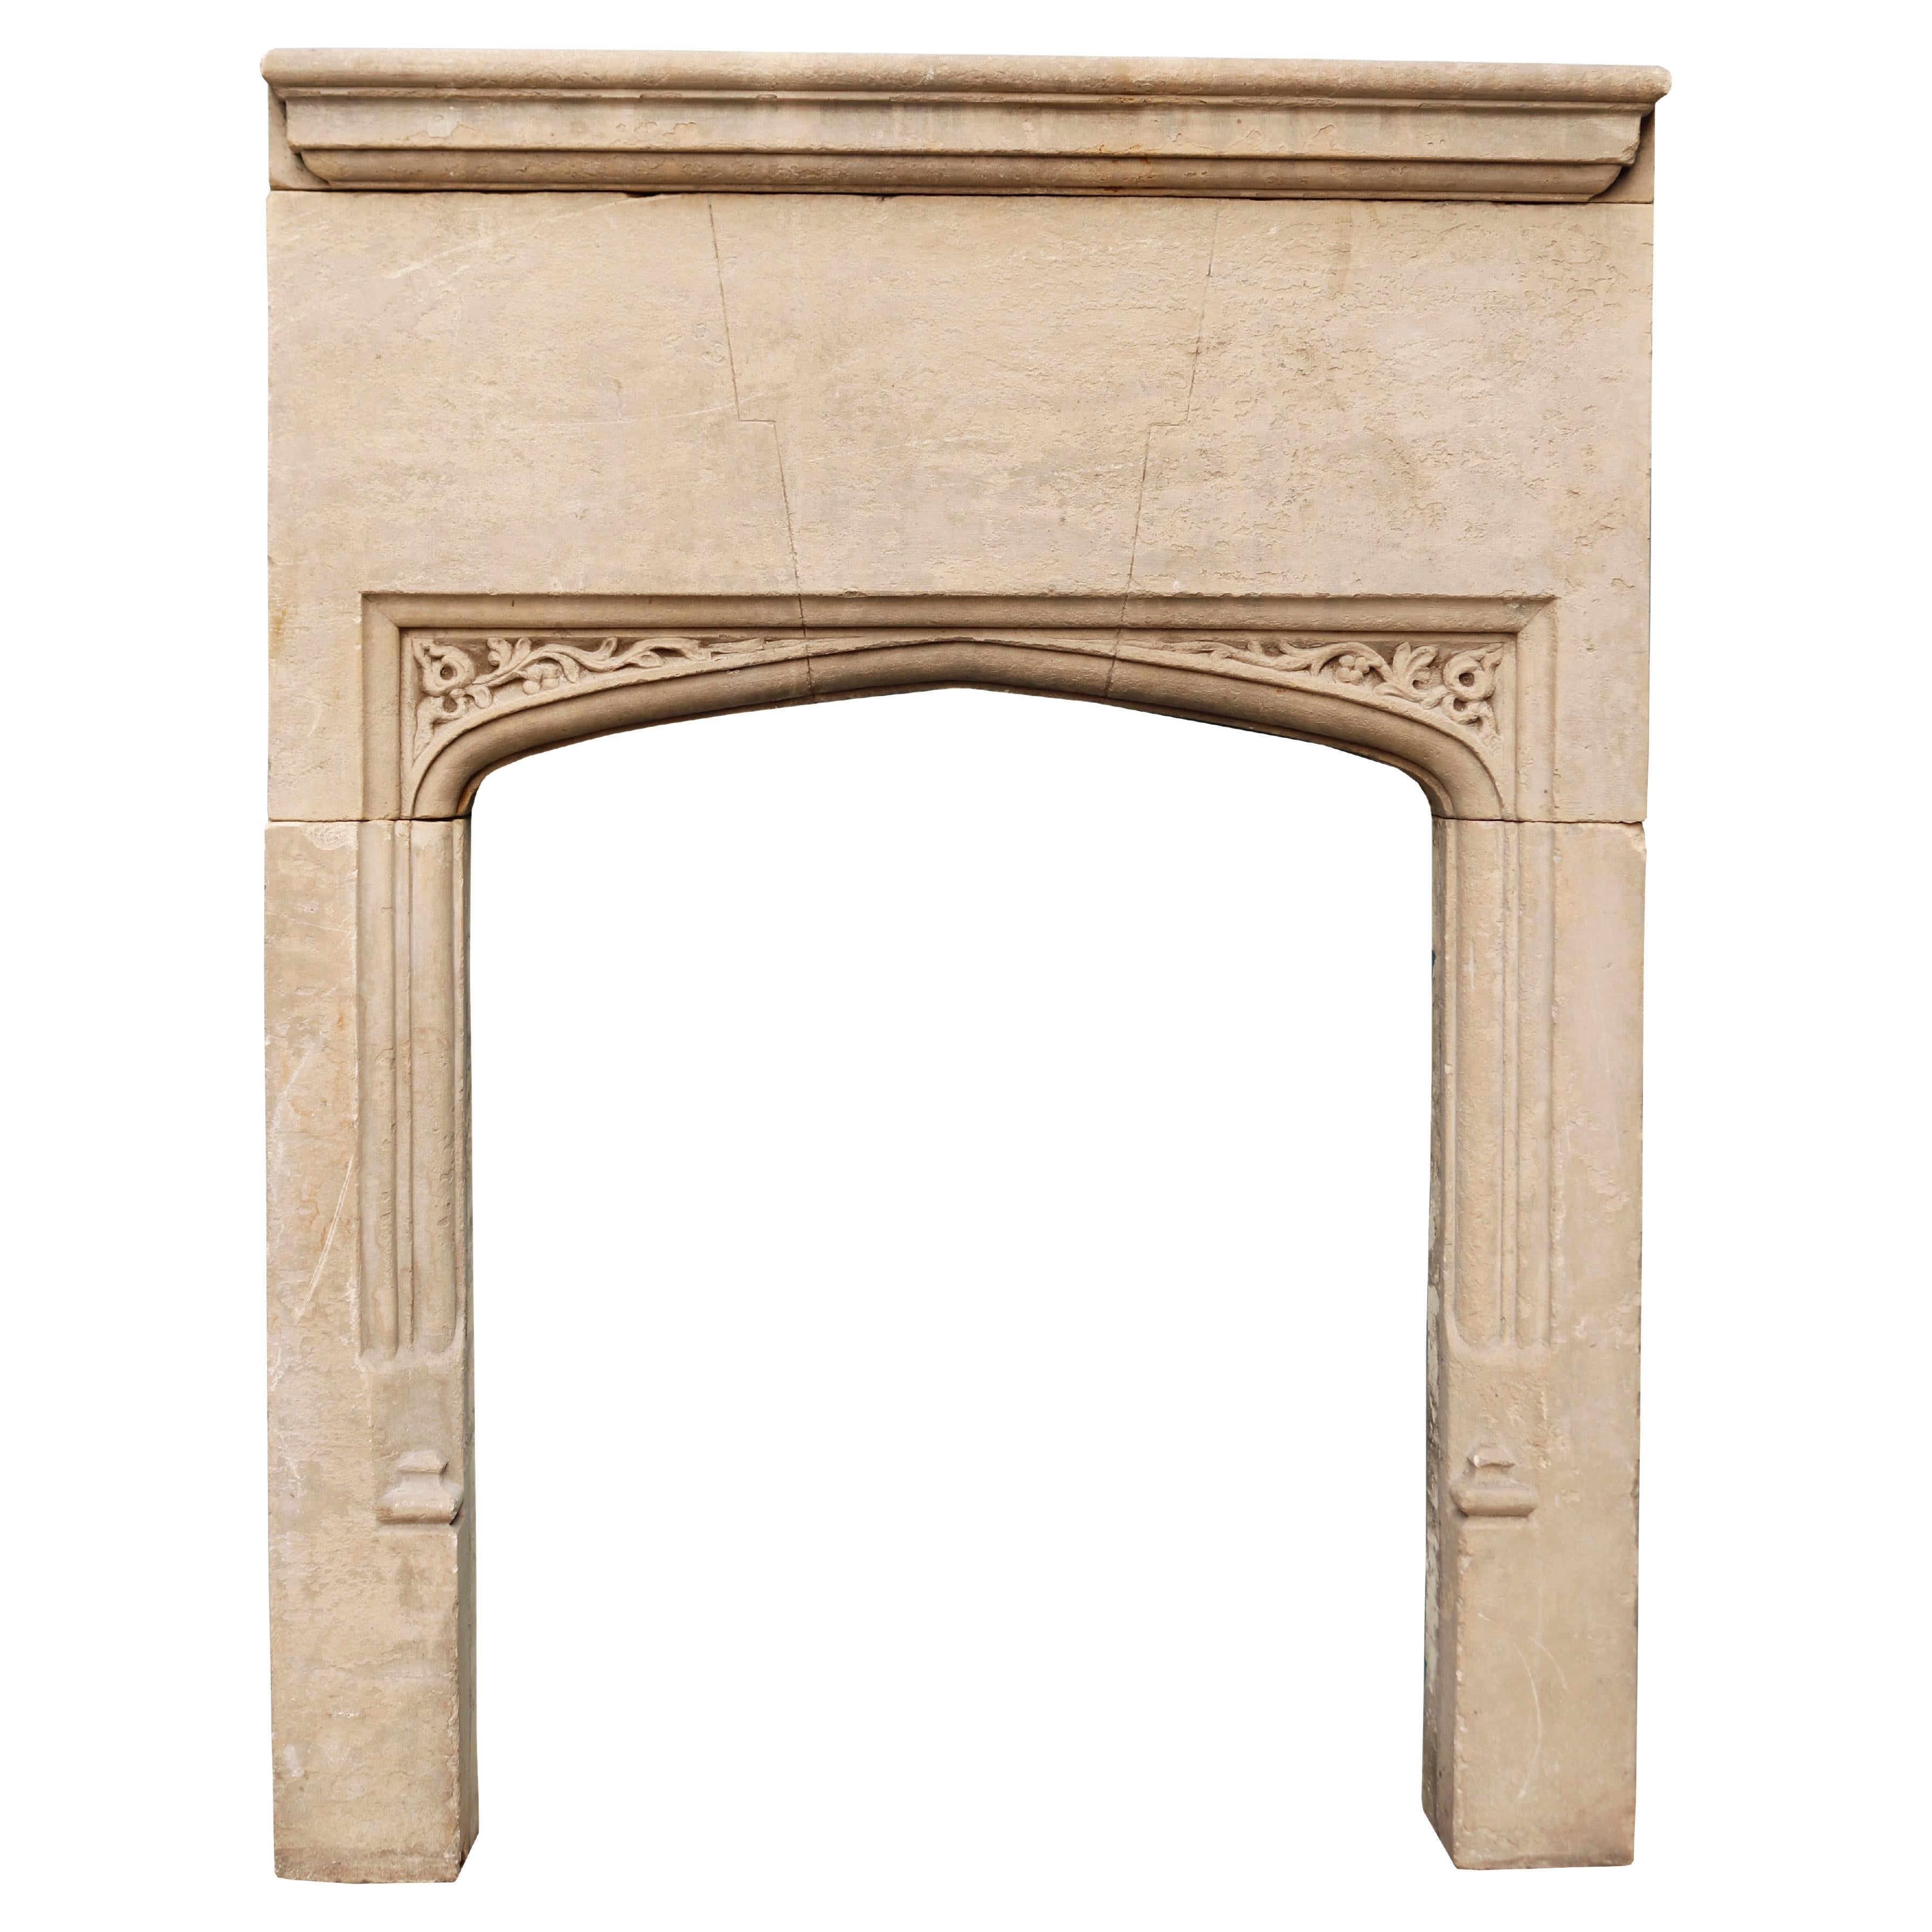 Antique Carved Limestone Fireplace Mantel